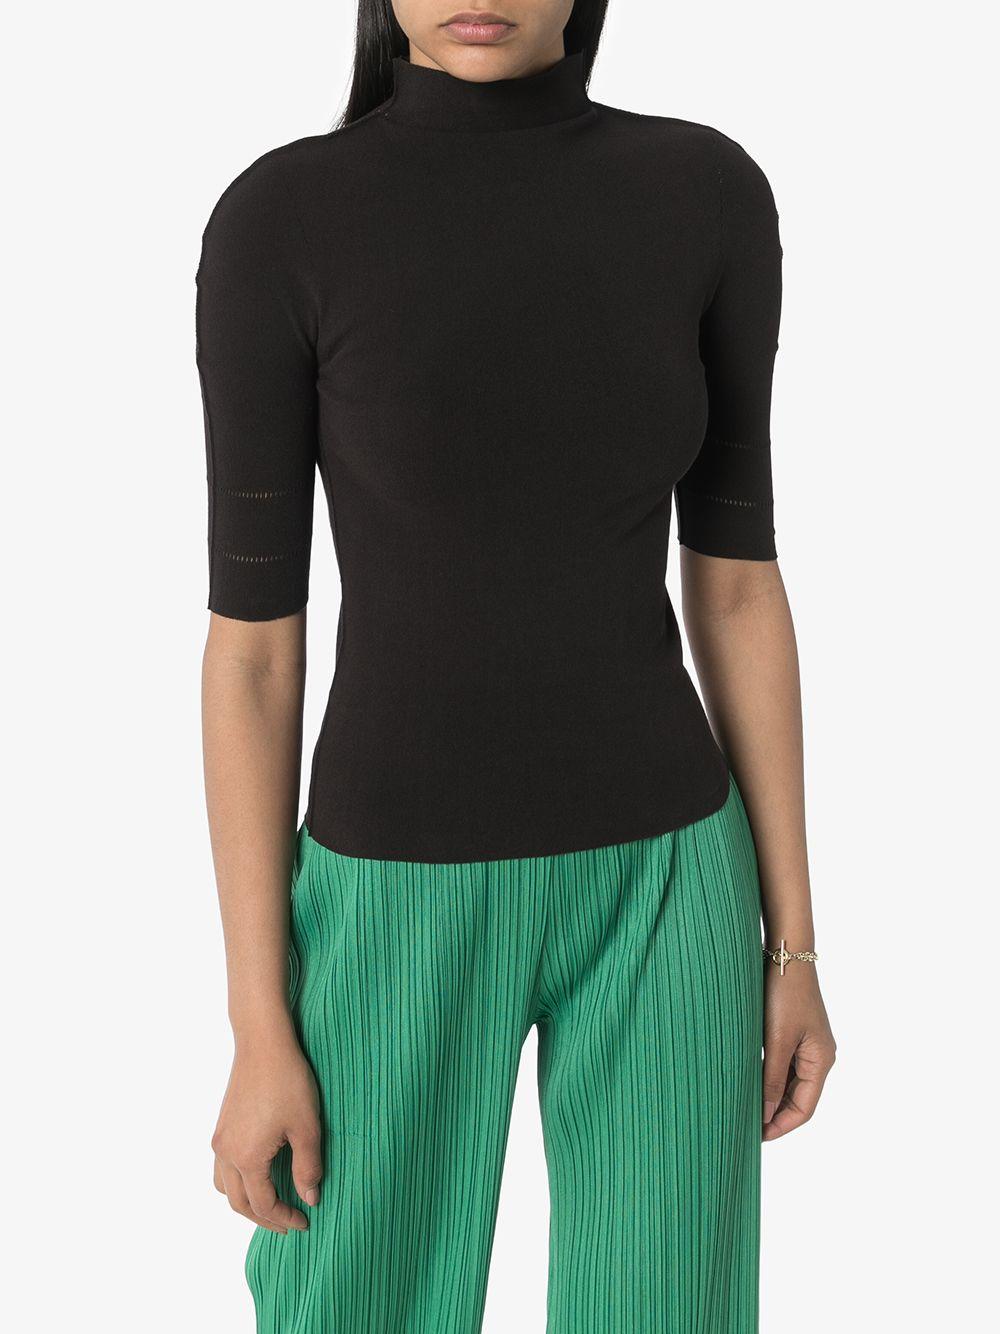 Issey Miyake Synthetic Turtleneck Mid Sleeve Top in Brown - Lyst